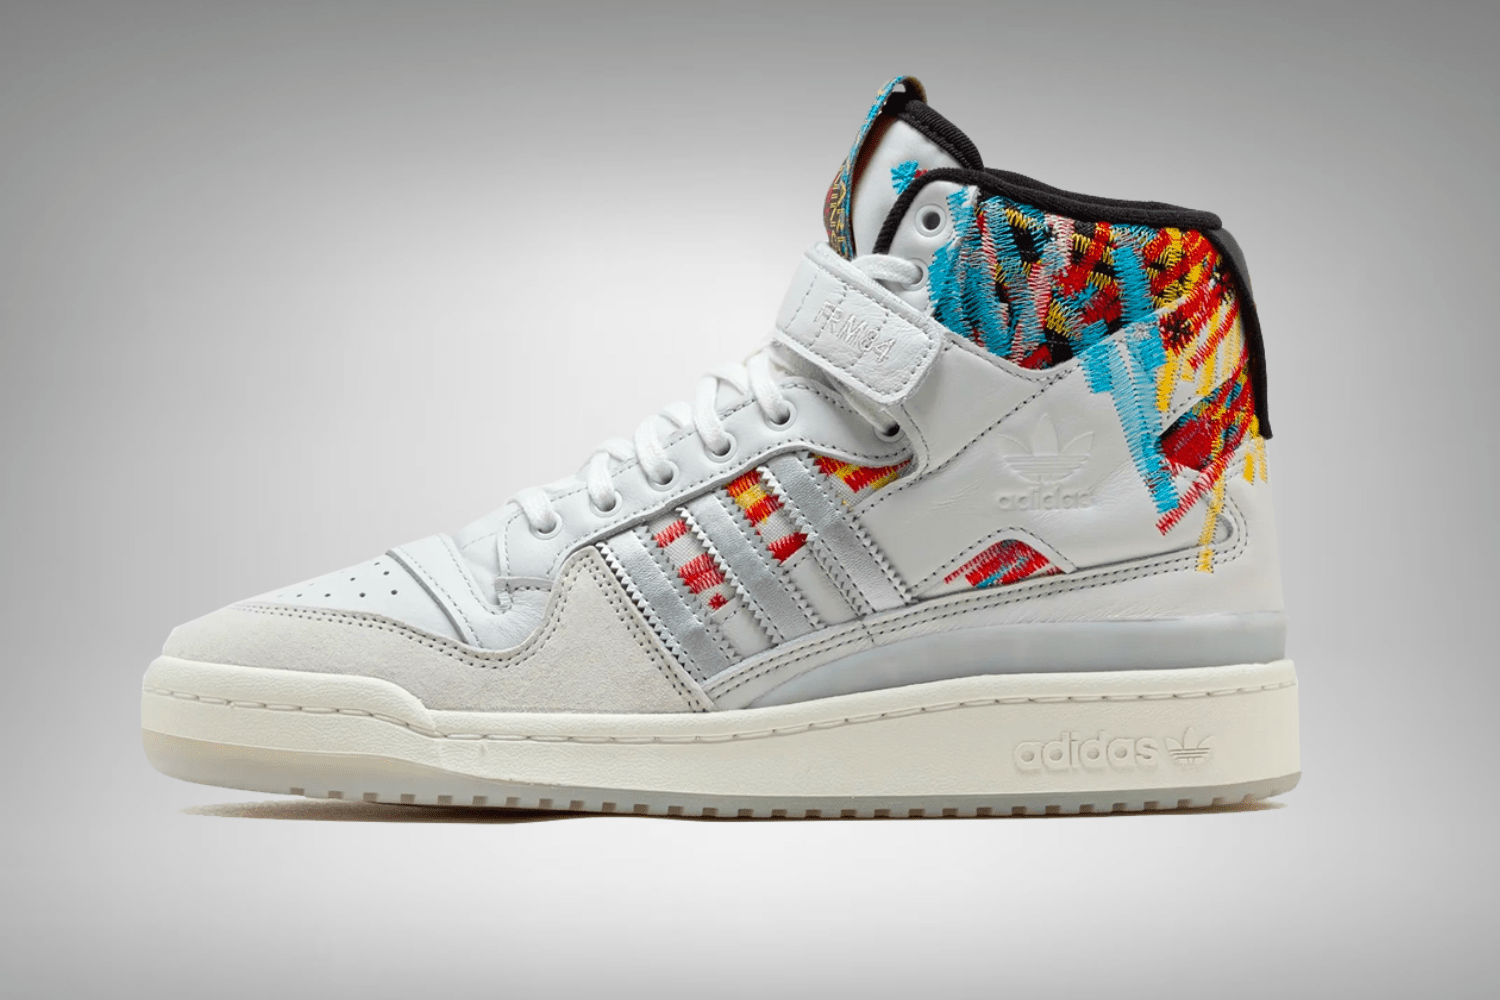 Check out the snowstorm-inspired Jacques Chassaing x adidas Forum 84 High